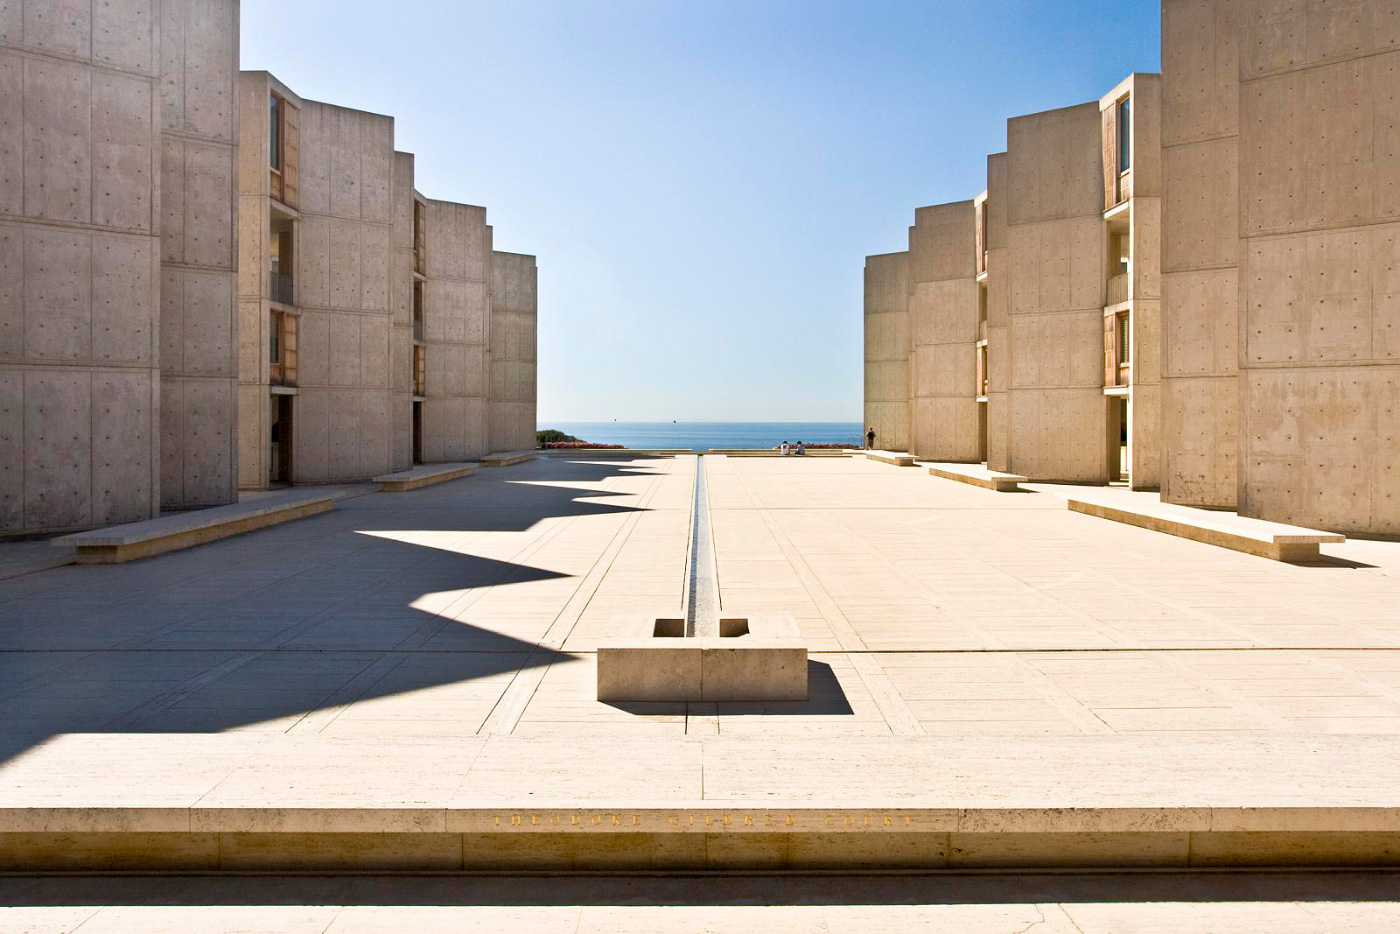 Review of 'The Evolution of a Building Complex: Louis I. Kahn's Salk  Institute for Biological Studies', 2019-09-09